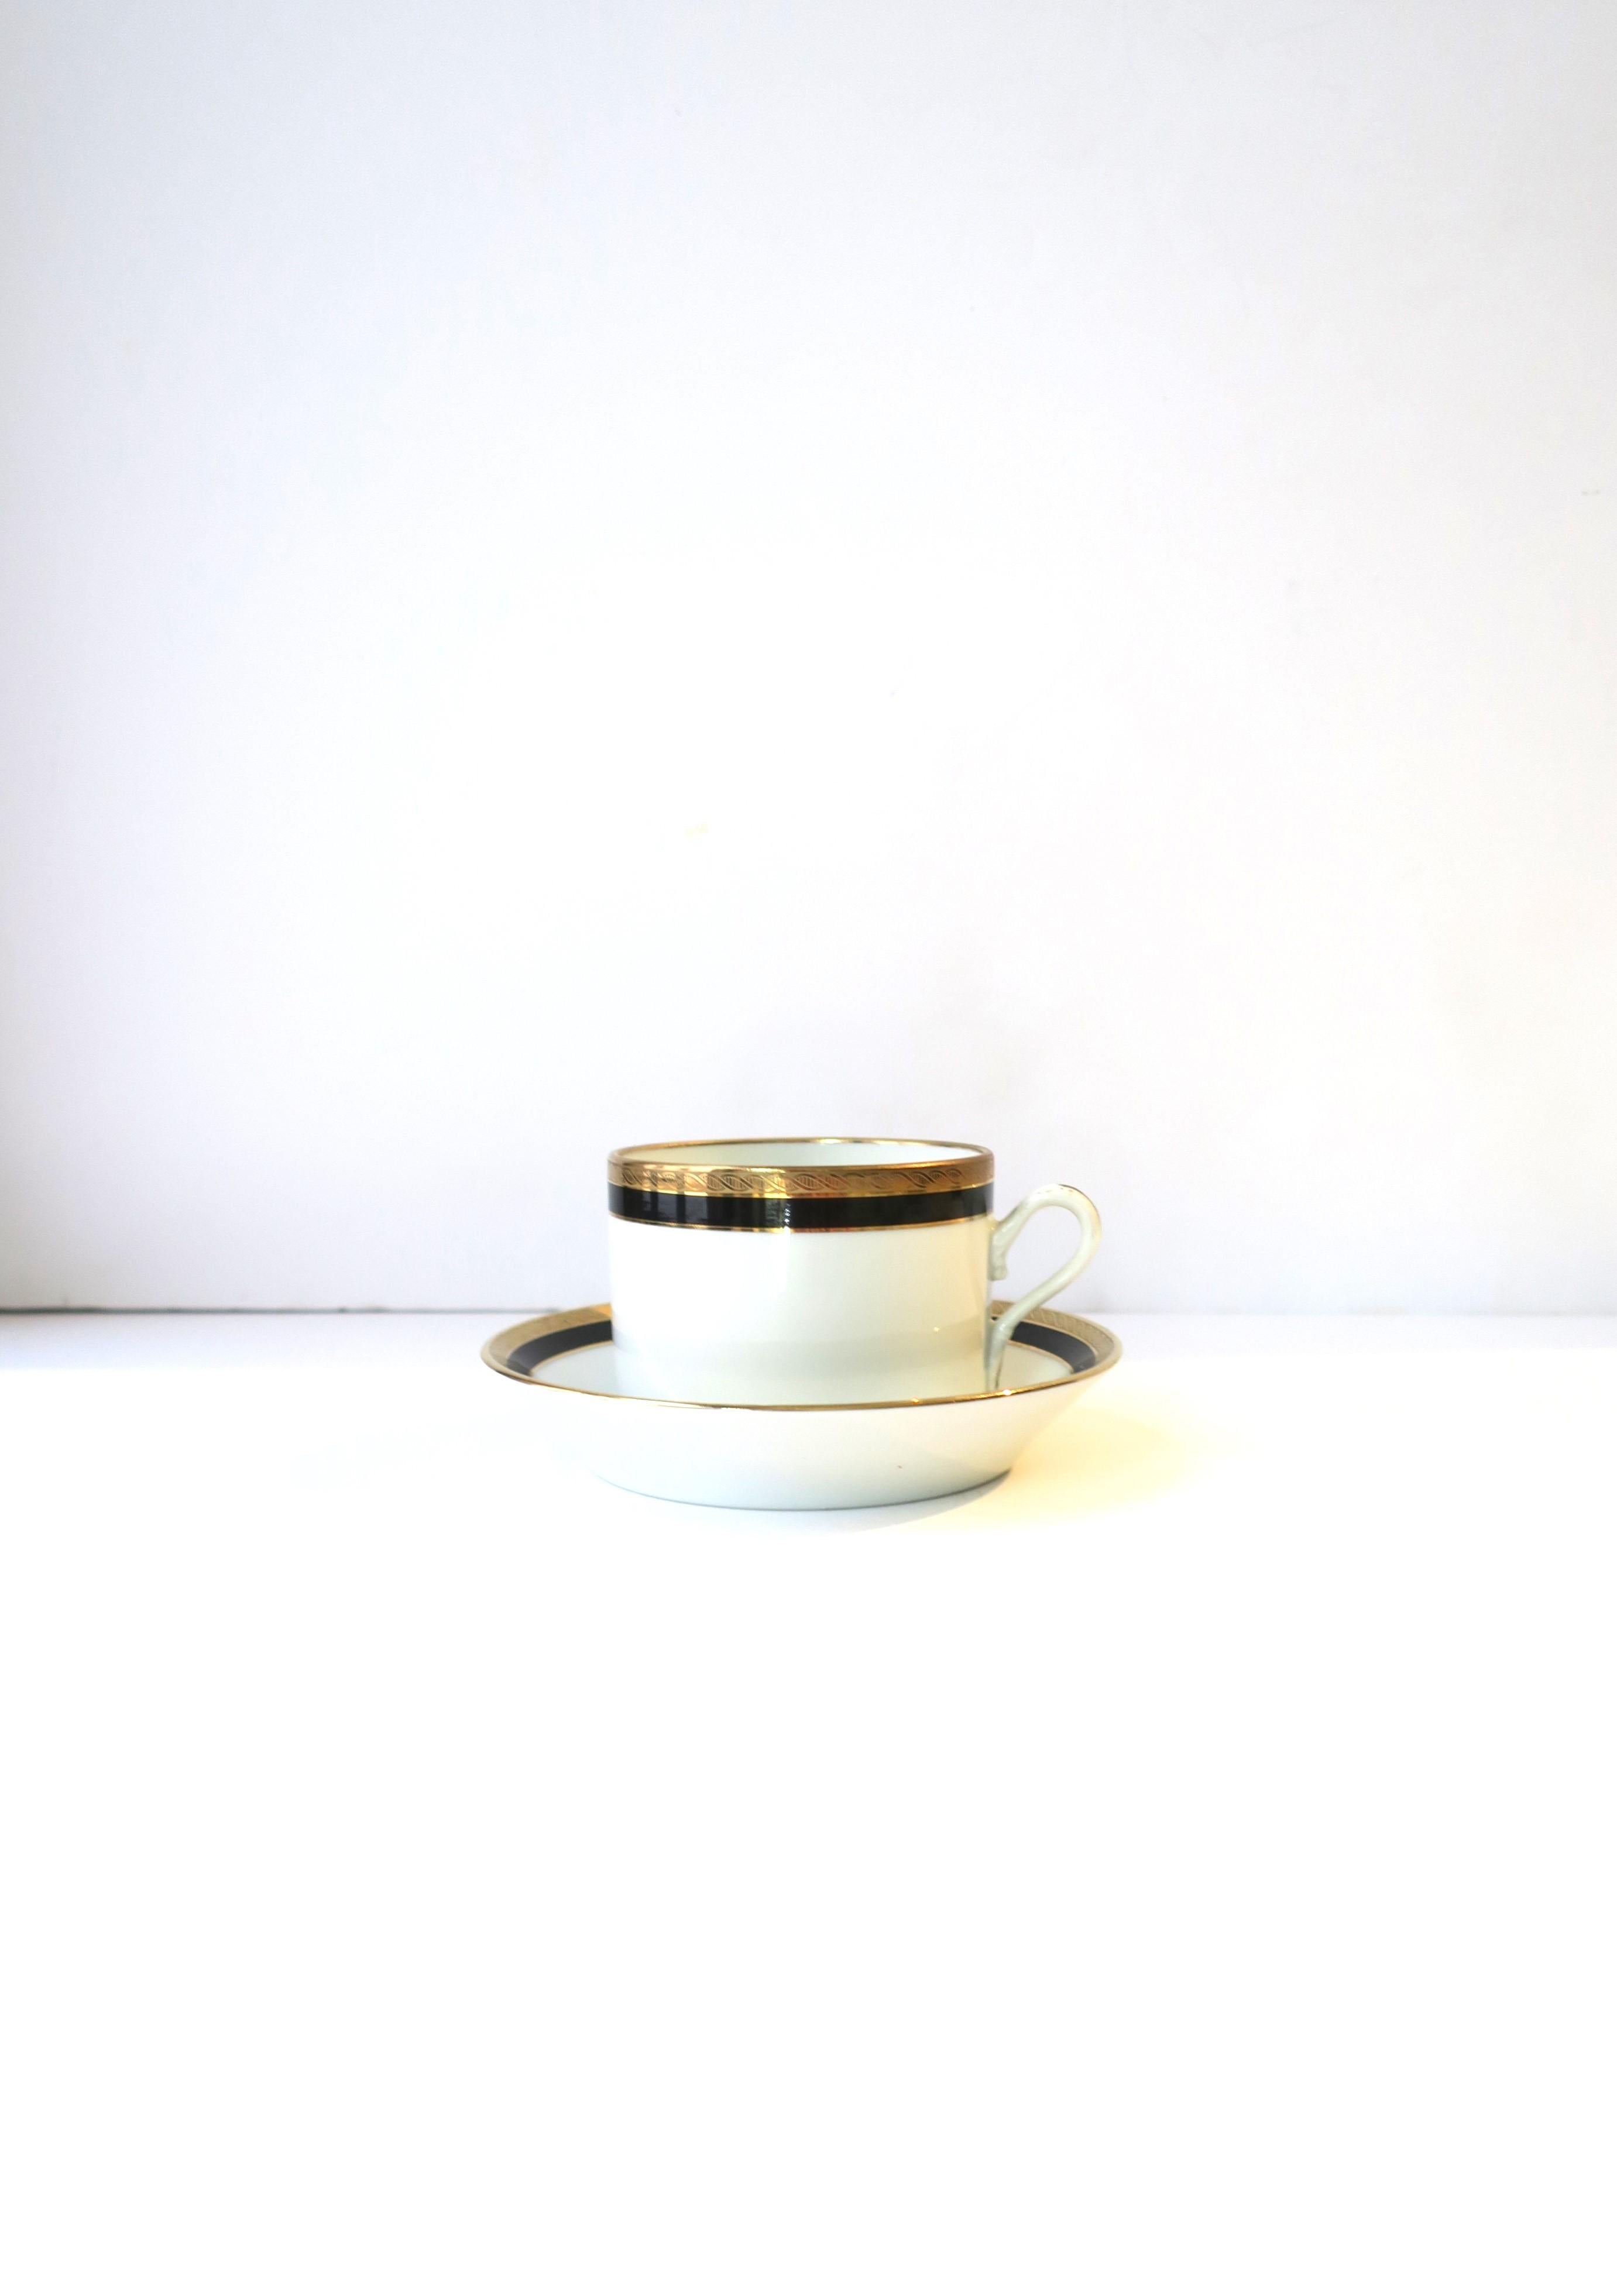 **Two available (as shown), each sold separately, as per listing. 

A beautiful and elegant Italian white porcelain, with black and gold, coffee or tea cup and saucer by designer Richard Ginori, circa mid-20th century, Italy. Colors include black,